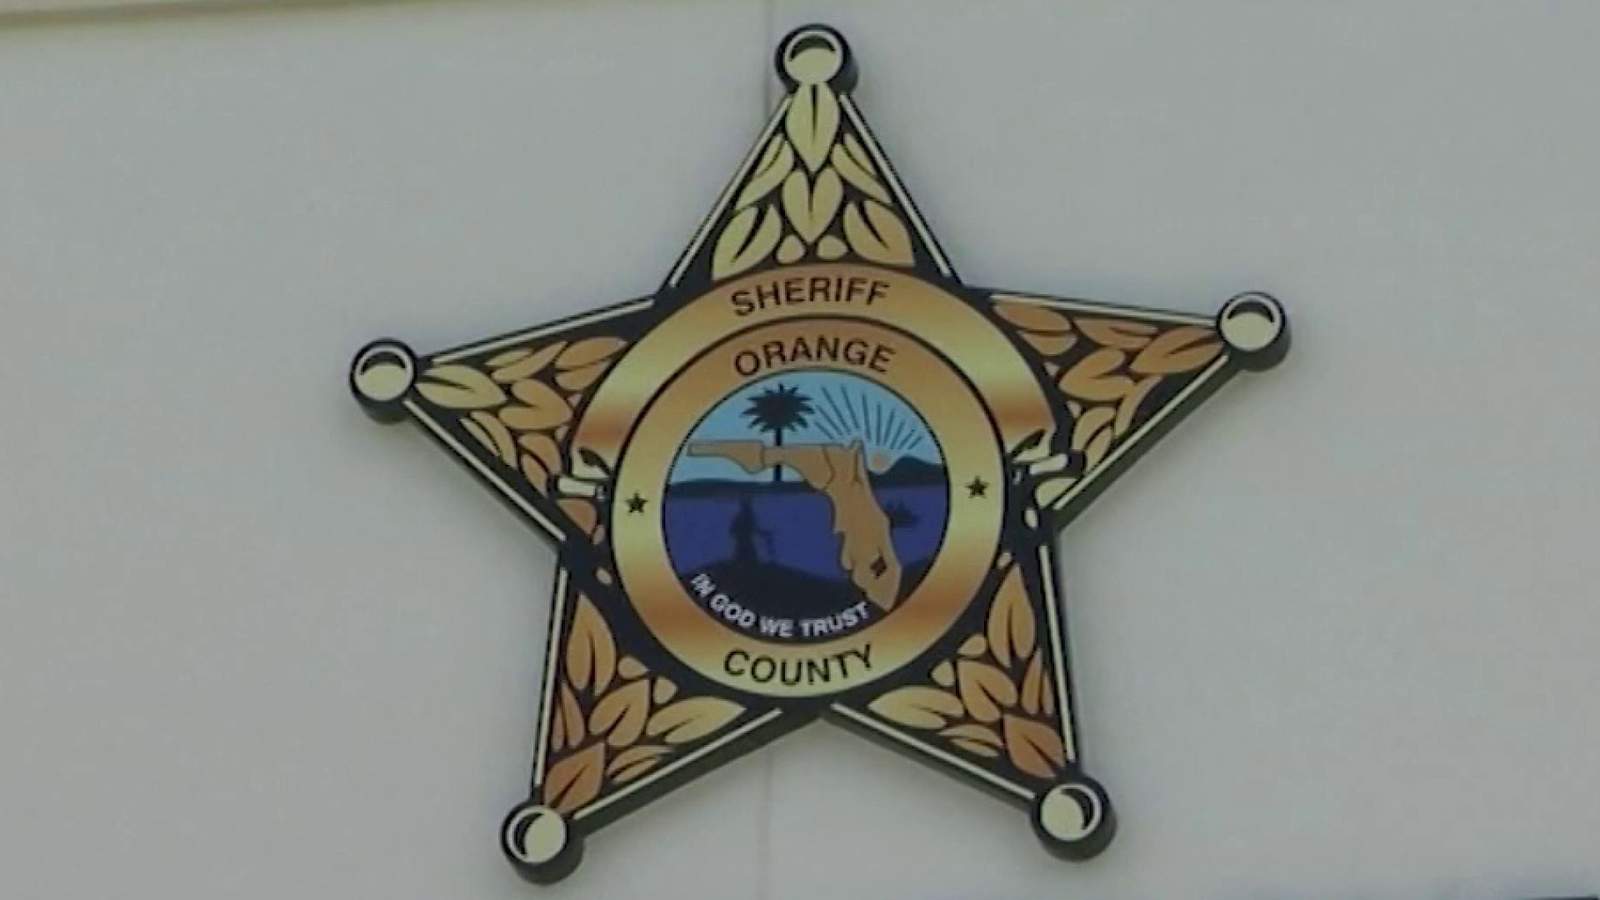 Activists voice concern over proposed $15 million increase for Orange County Sheriff’s Office